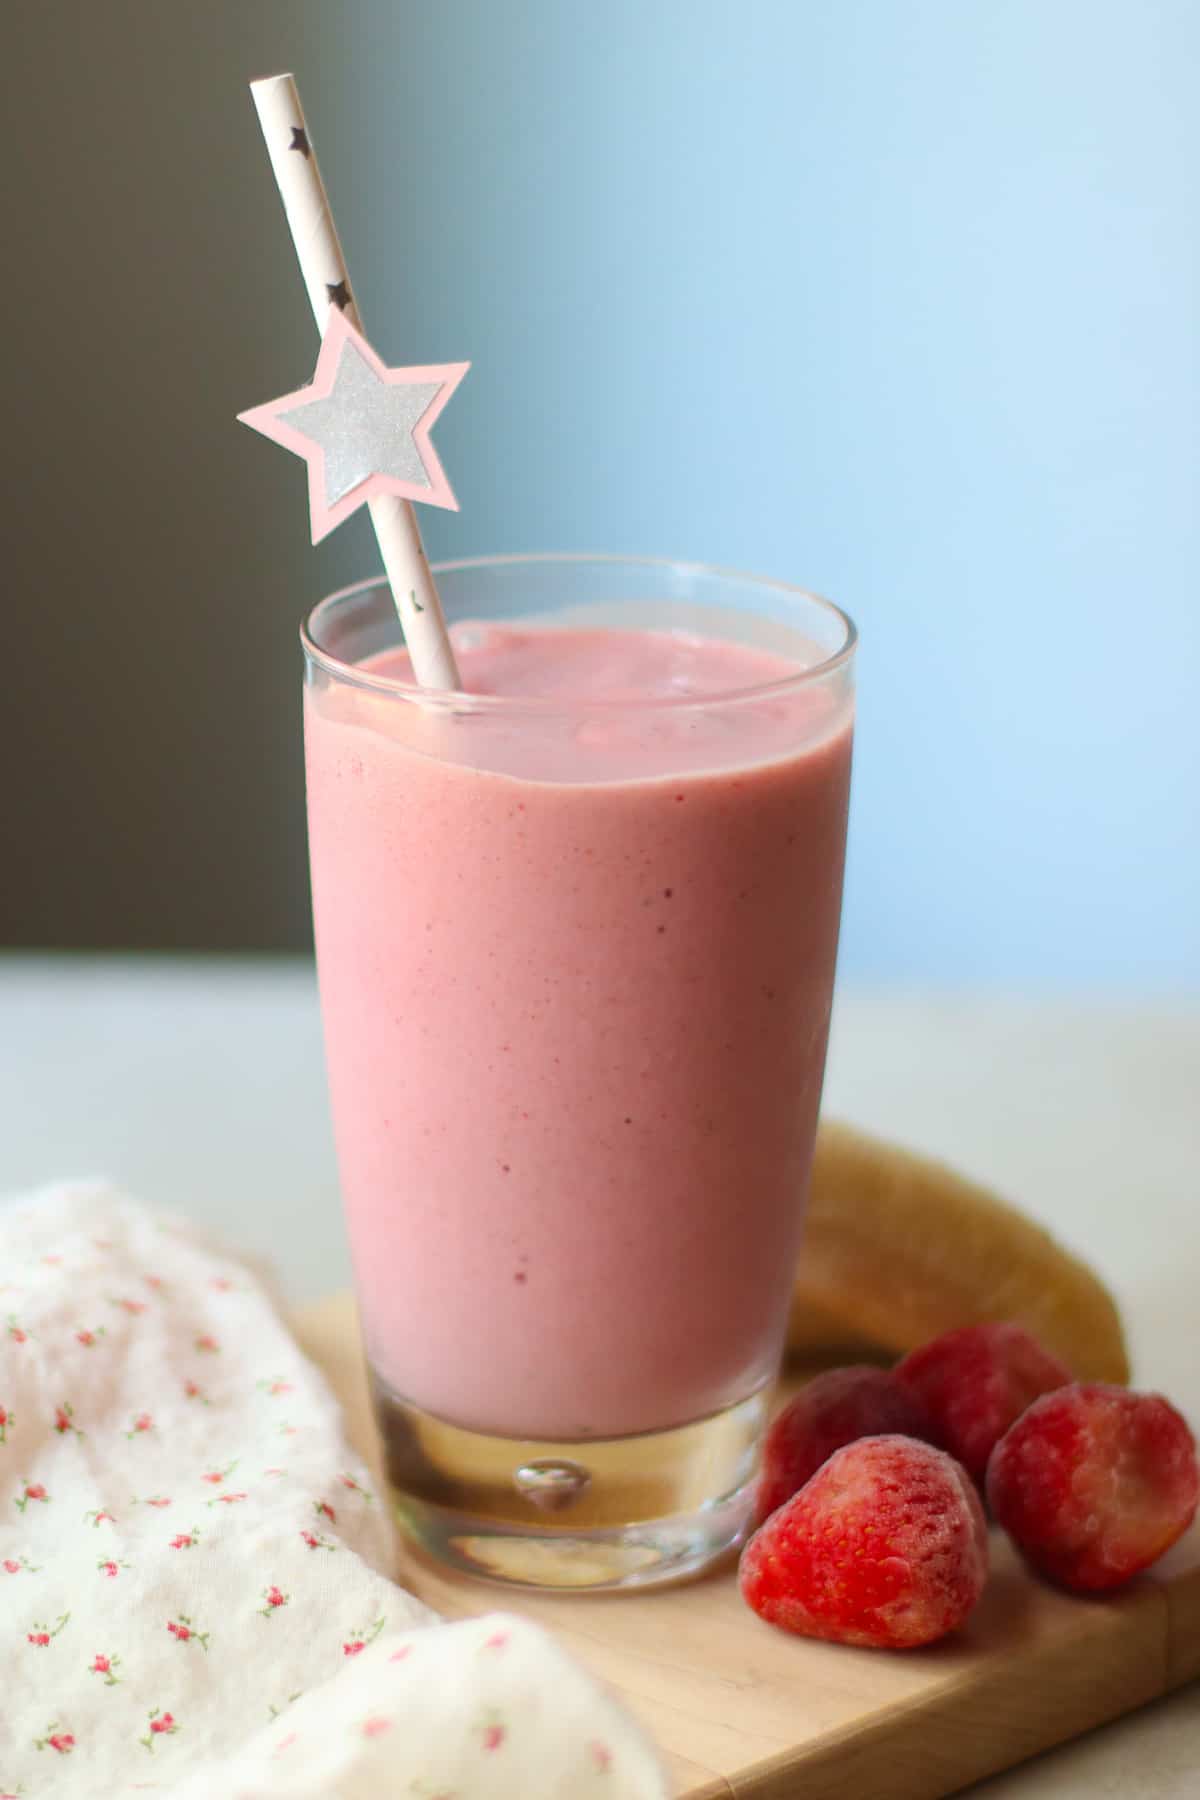 Strawberry banana milkshake in a glass with a straw and strawberries in the background.